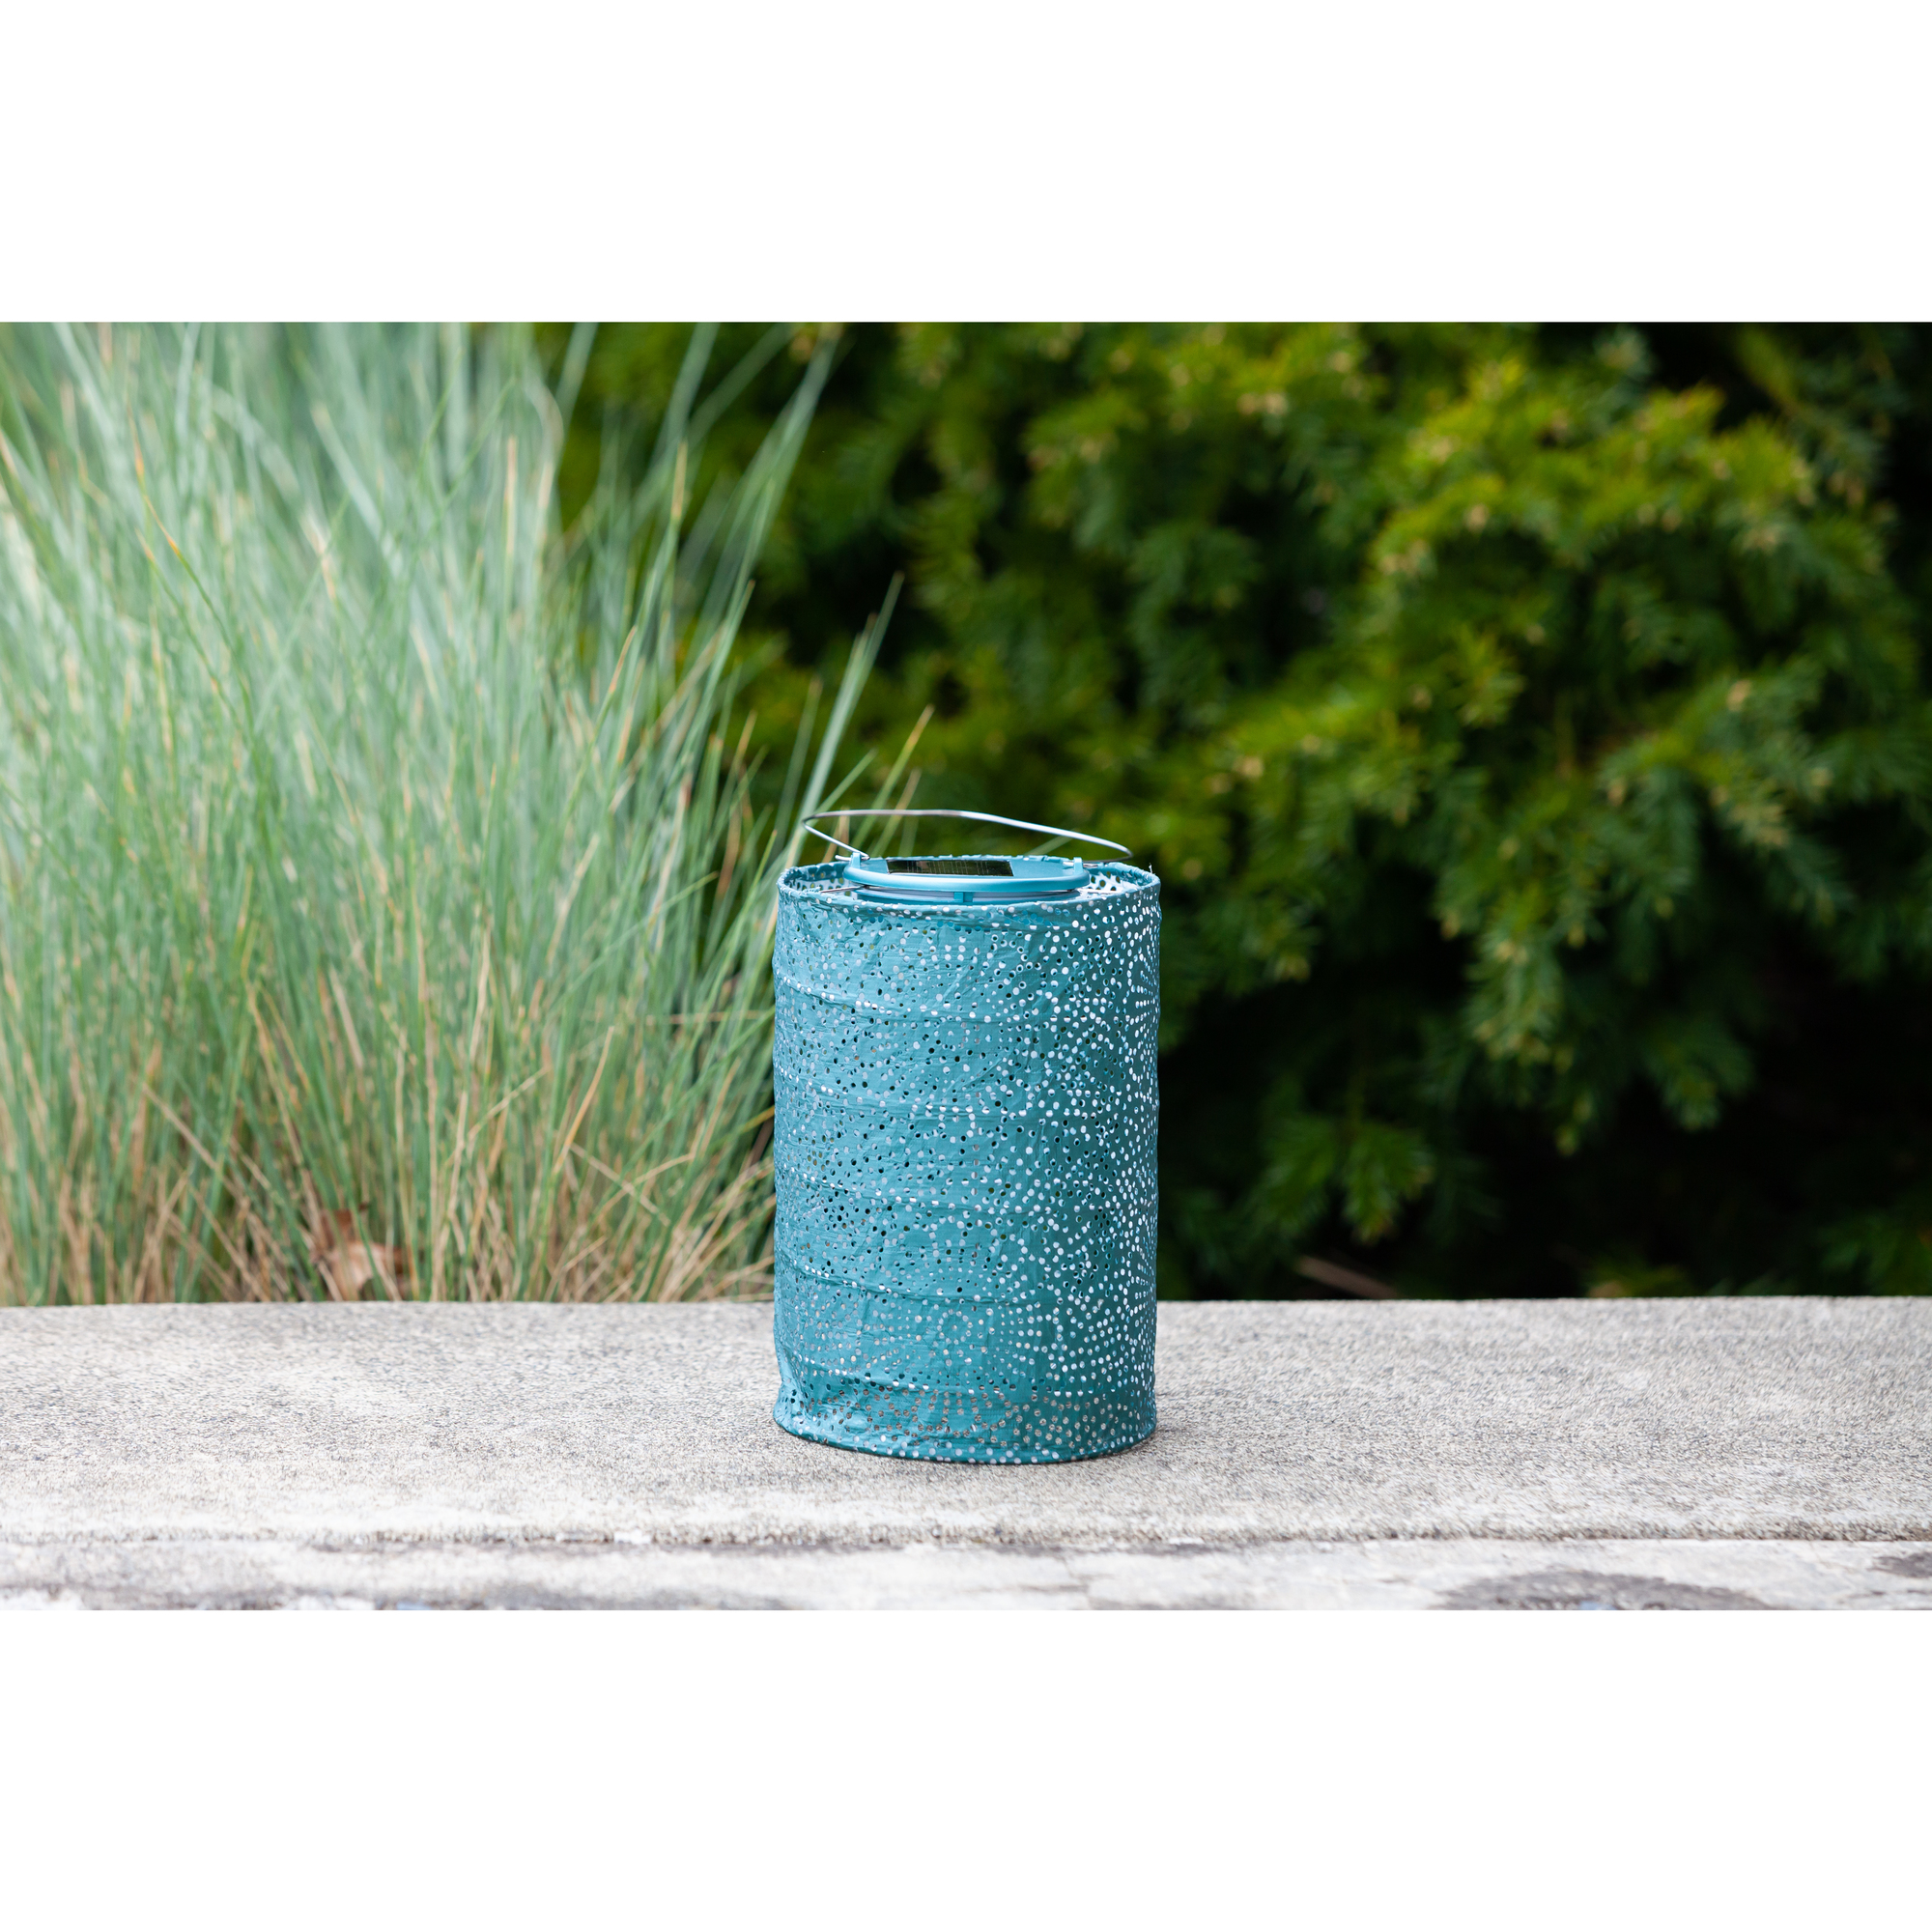 Allsop Home and Garden, Soji Stella Cylinder - Metallic Emerald, Color Green, Included (qty.) 1 Model 32359